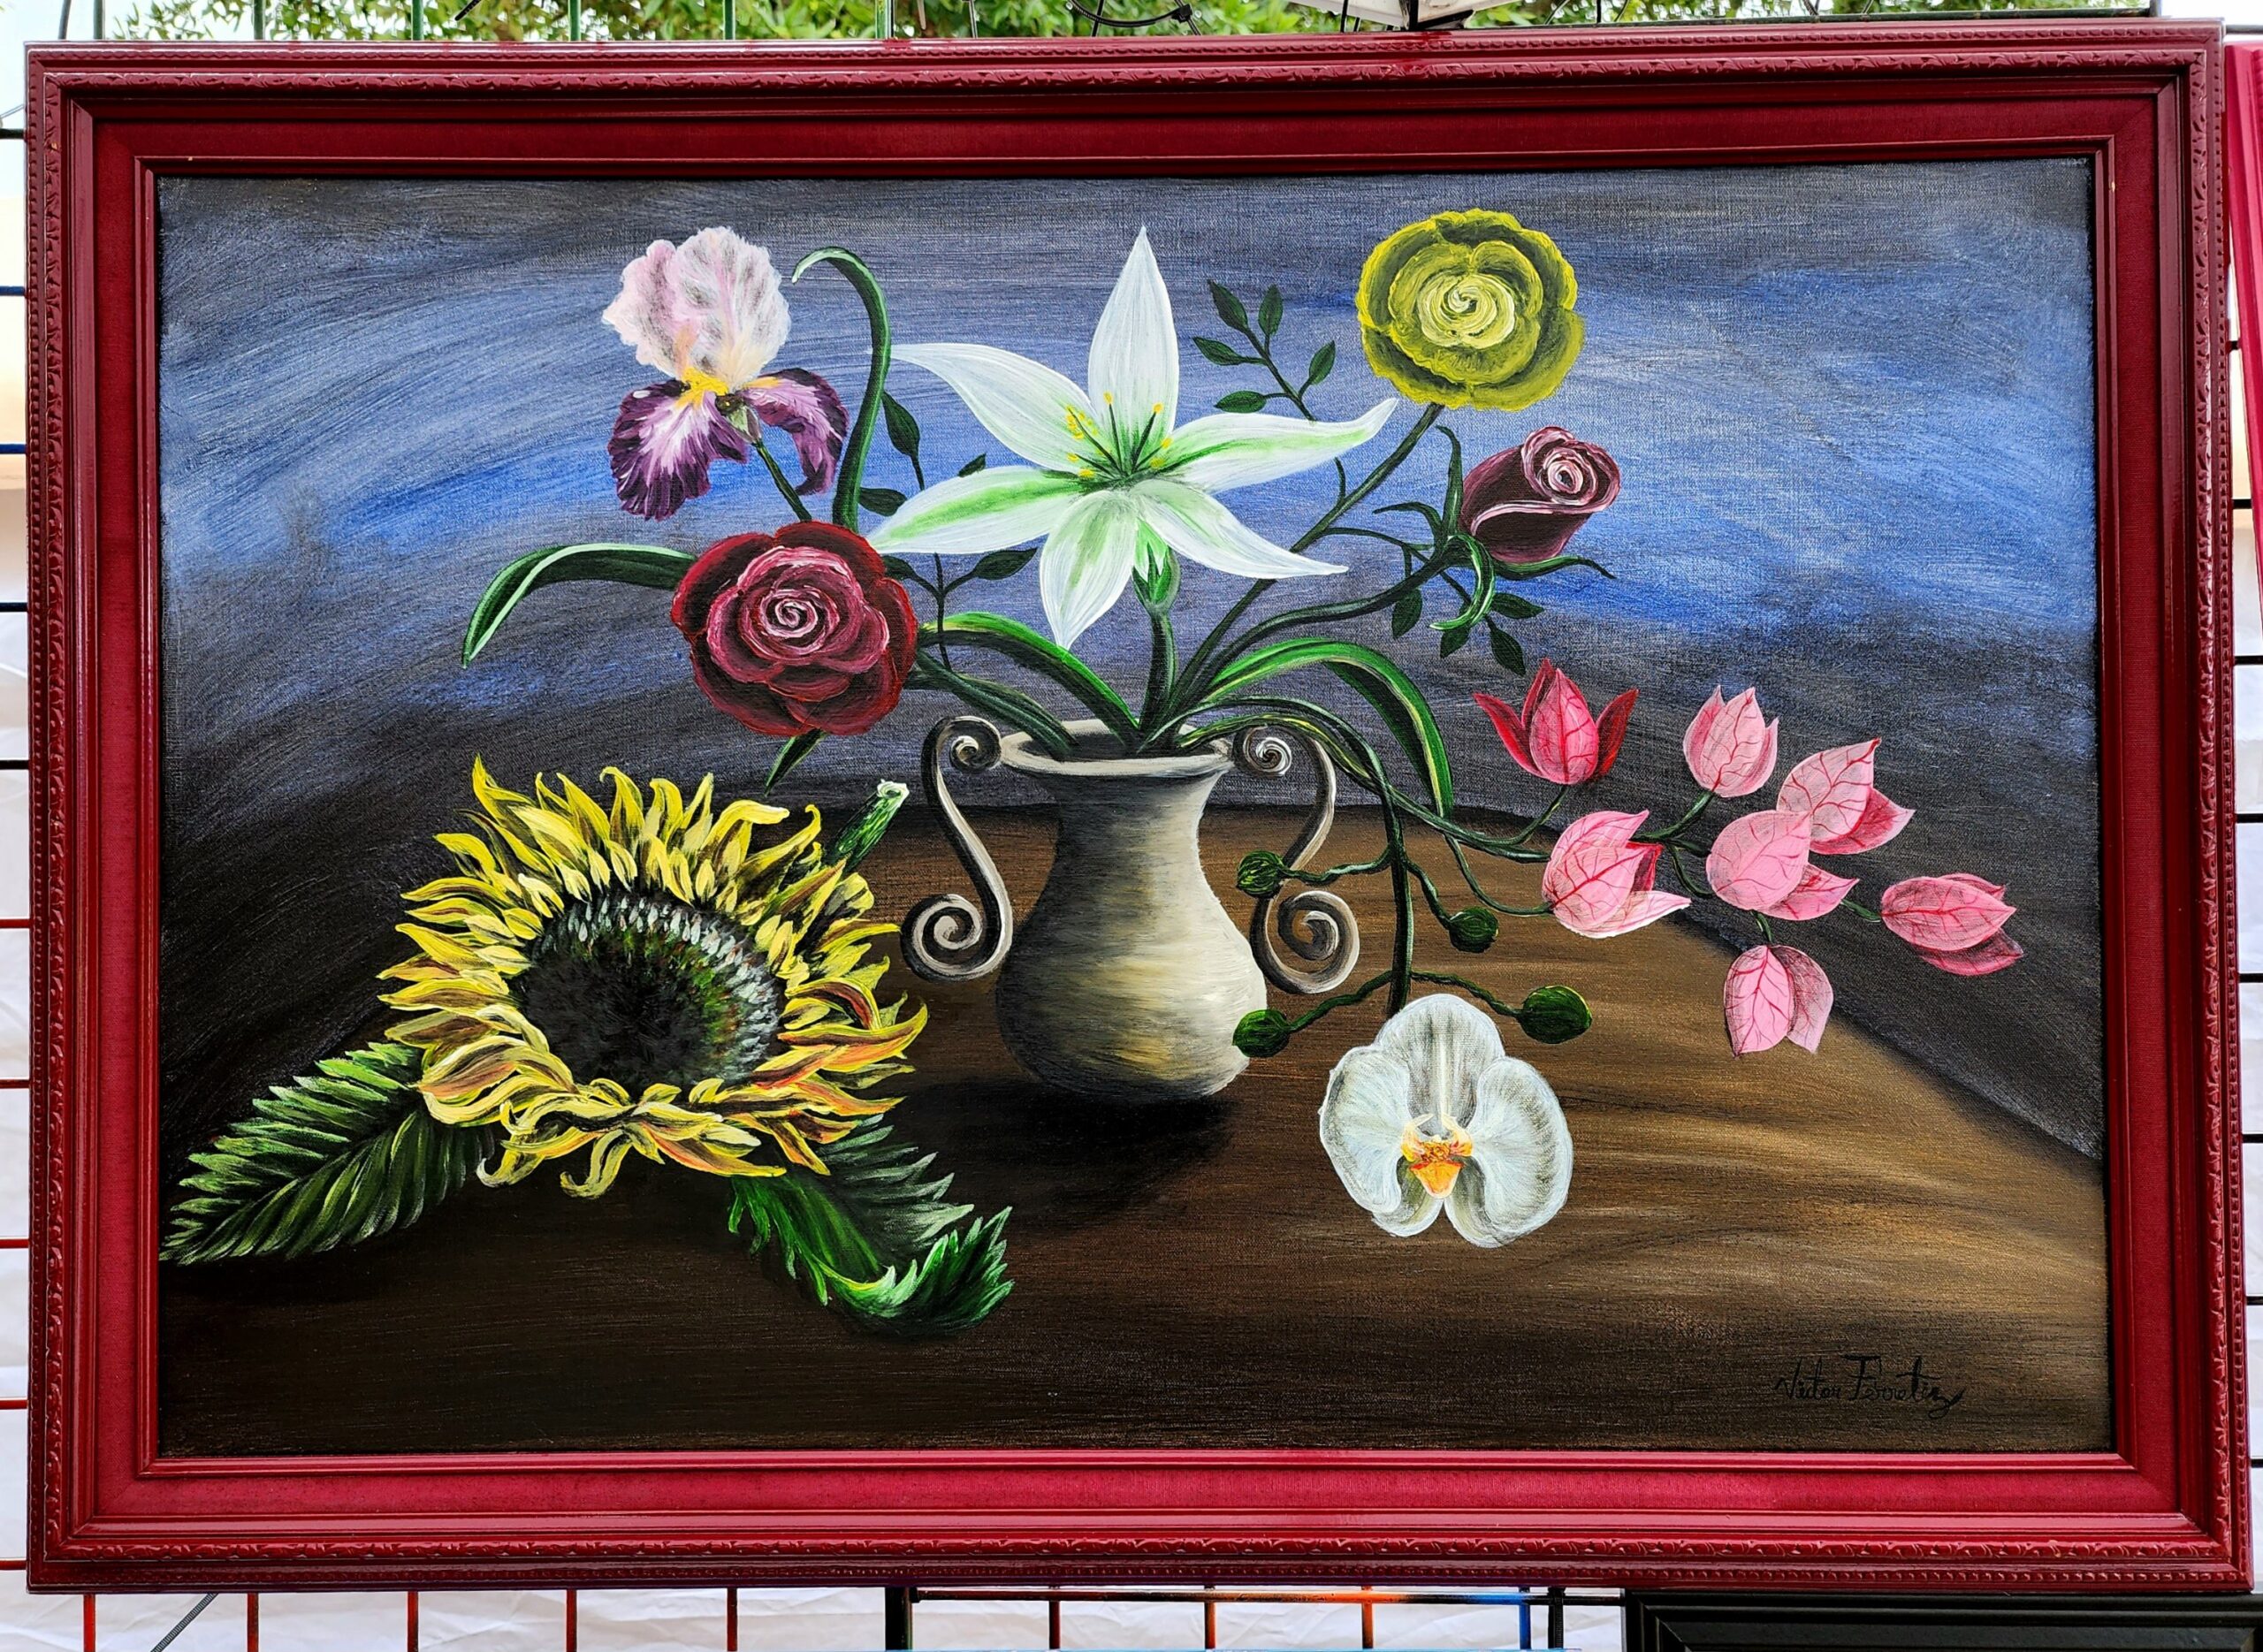 This painting was a creation of my imagination, for example the position, the form, the texture, and the color of the flowers were not traced to start with the process. Painted wooden frame. Painting size: 24"x36"